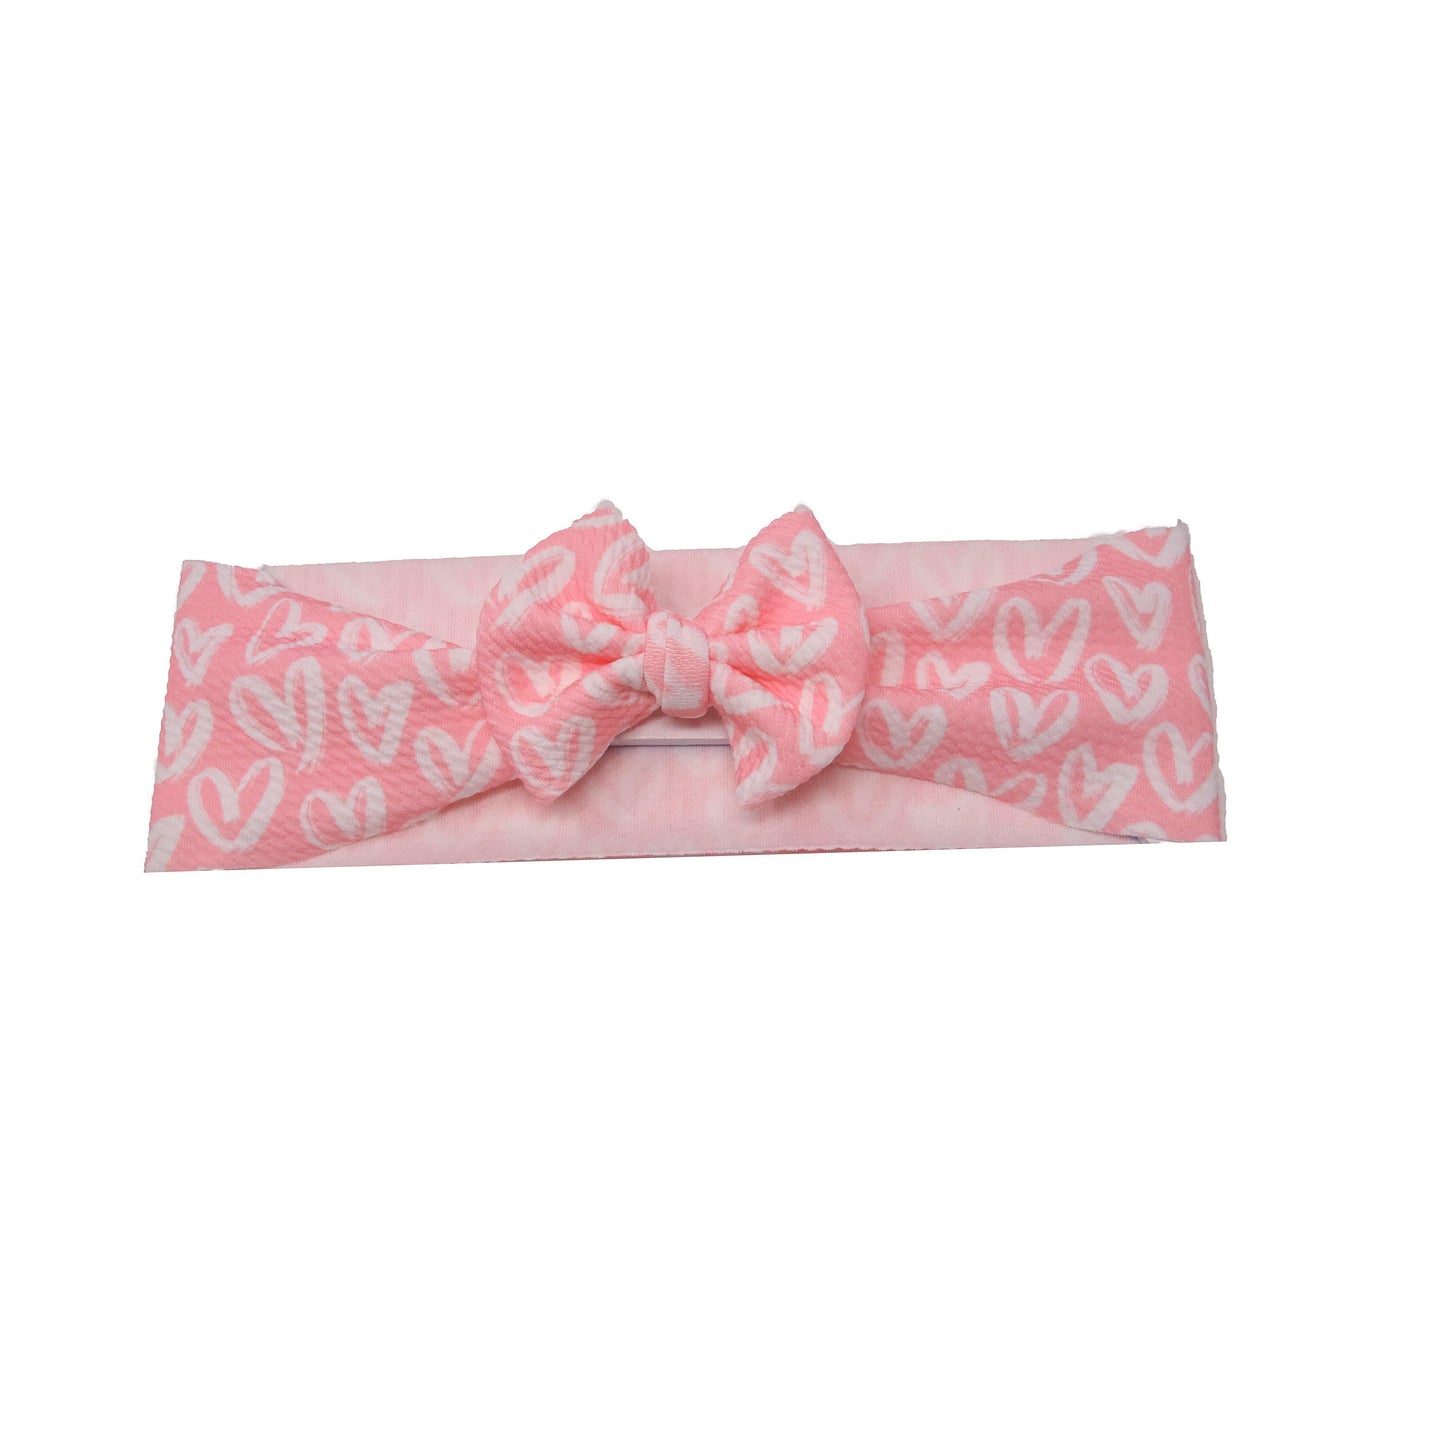 White Hearts on Pink Fabric Bow Headwrap 3"